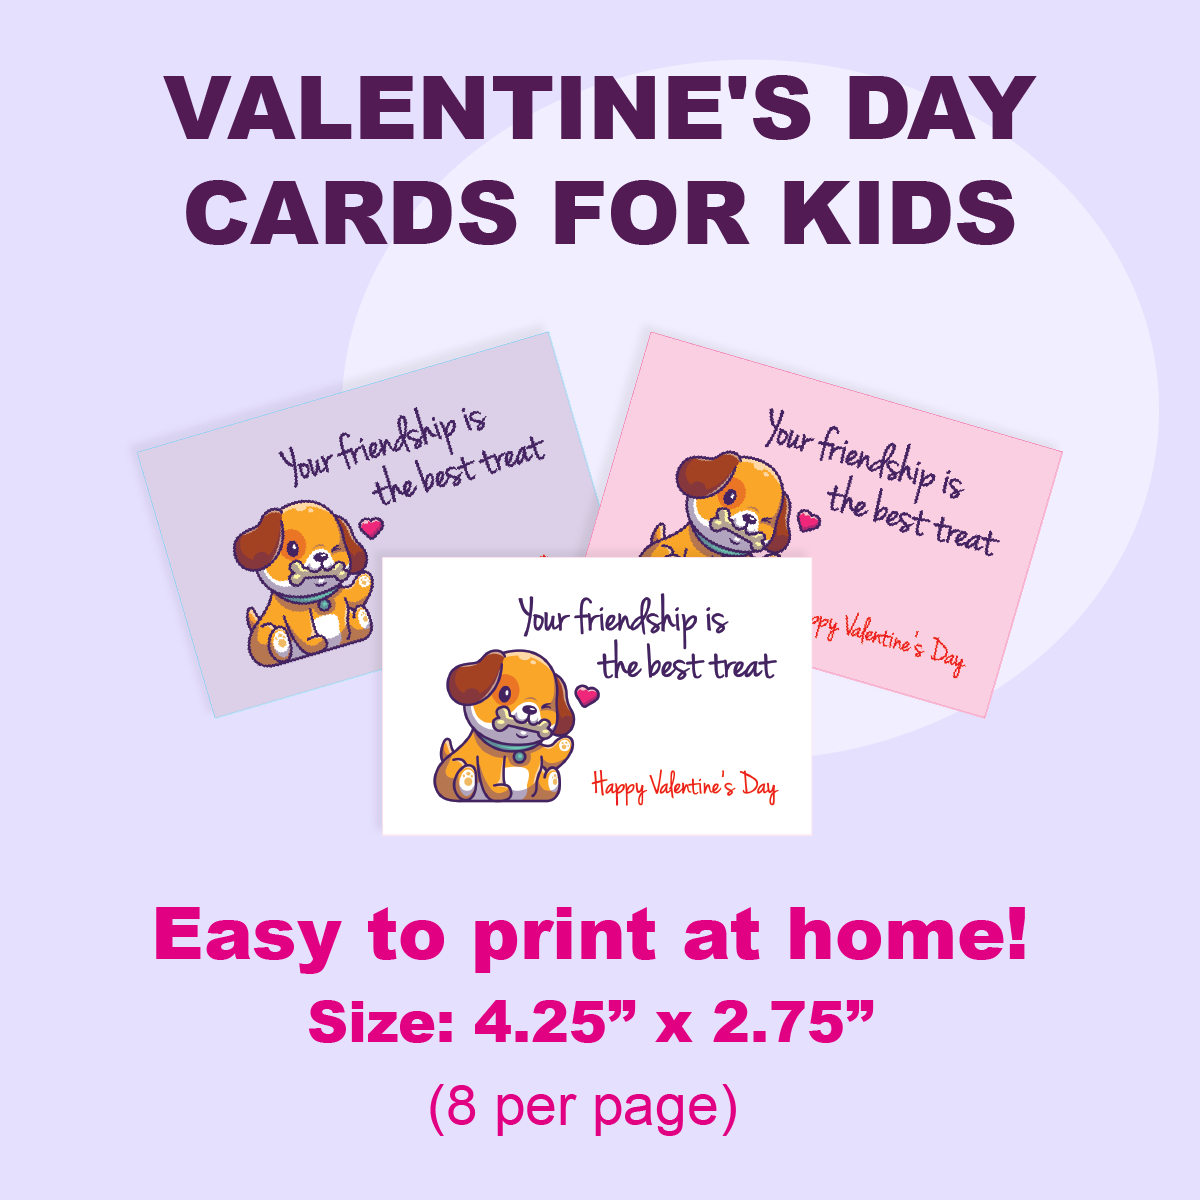 Valentine's Day Cards with cute puppy illustration.